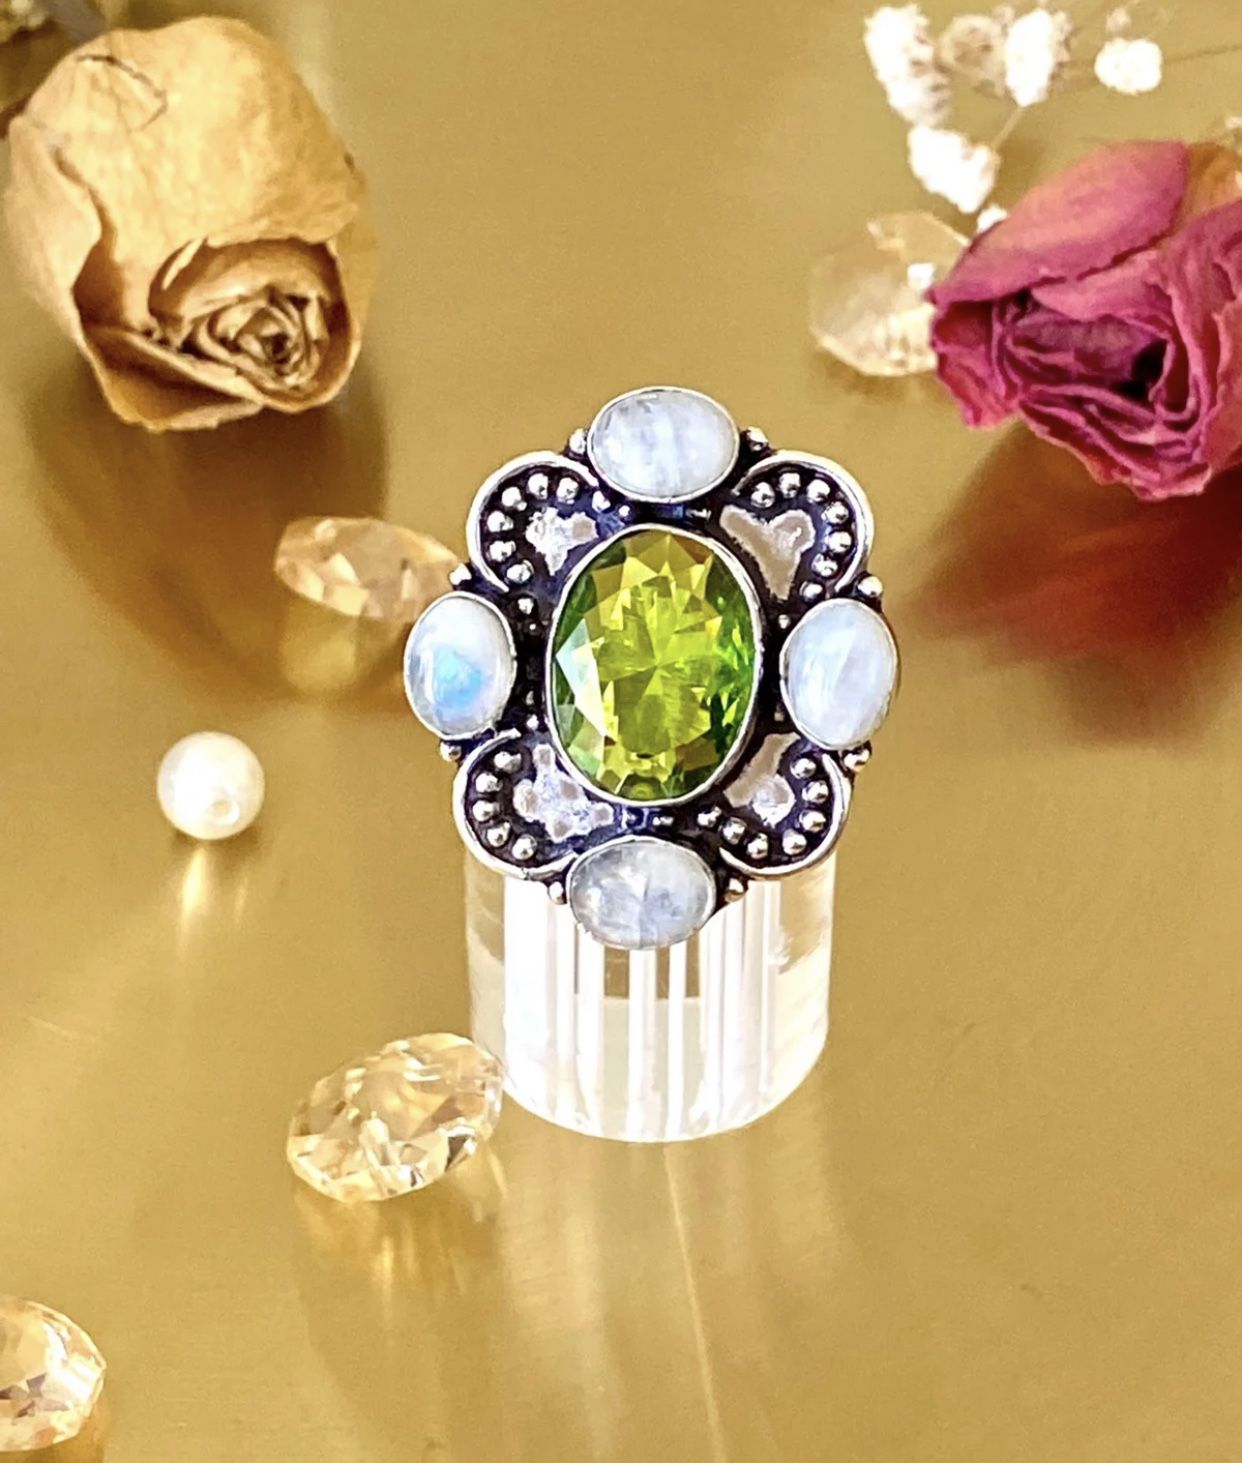 Rainbow Moonstone And Peridot 925 Sterling Silver Overlay Handcrafted Ring Size 7.75